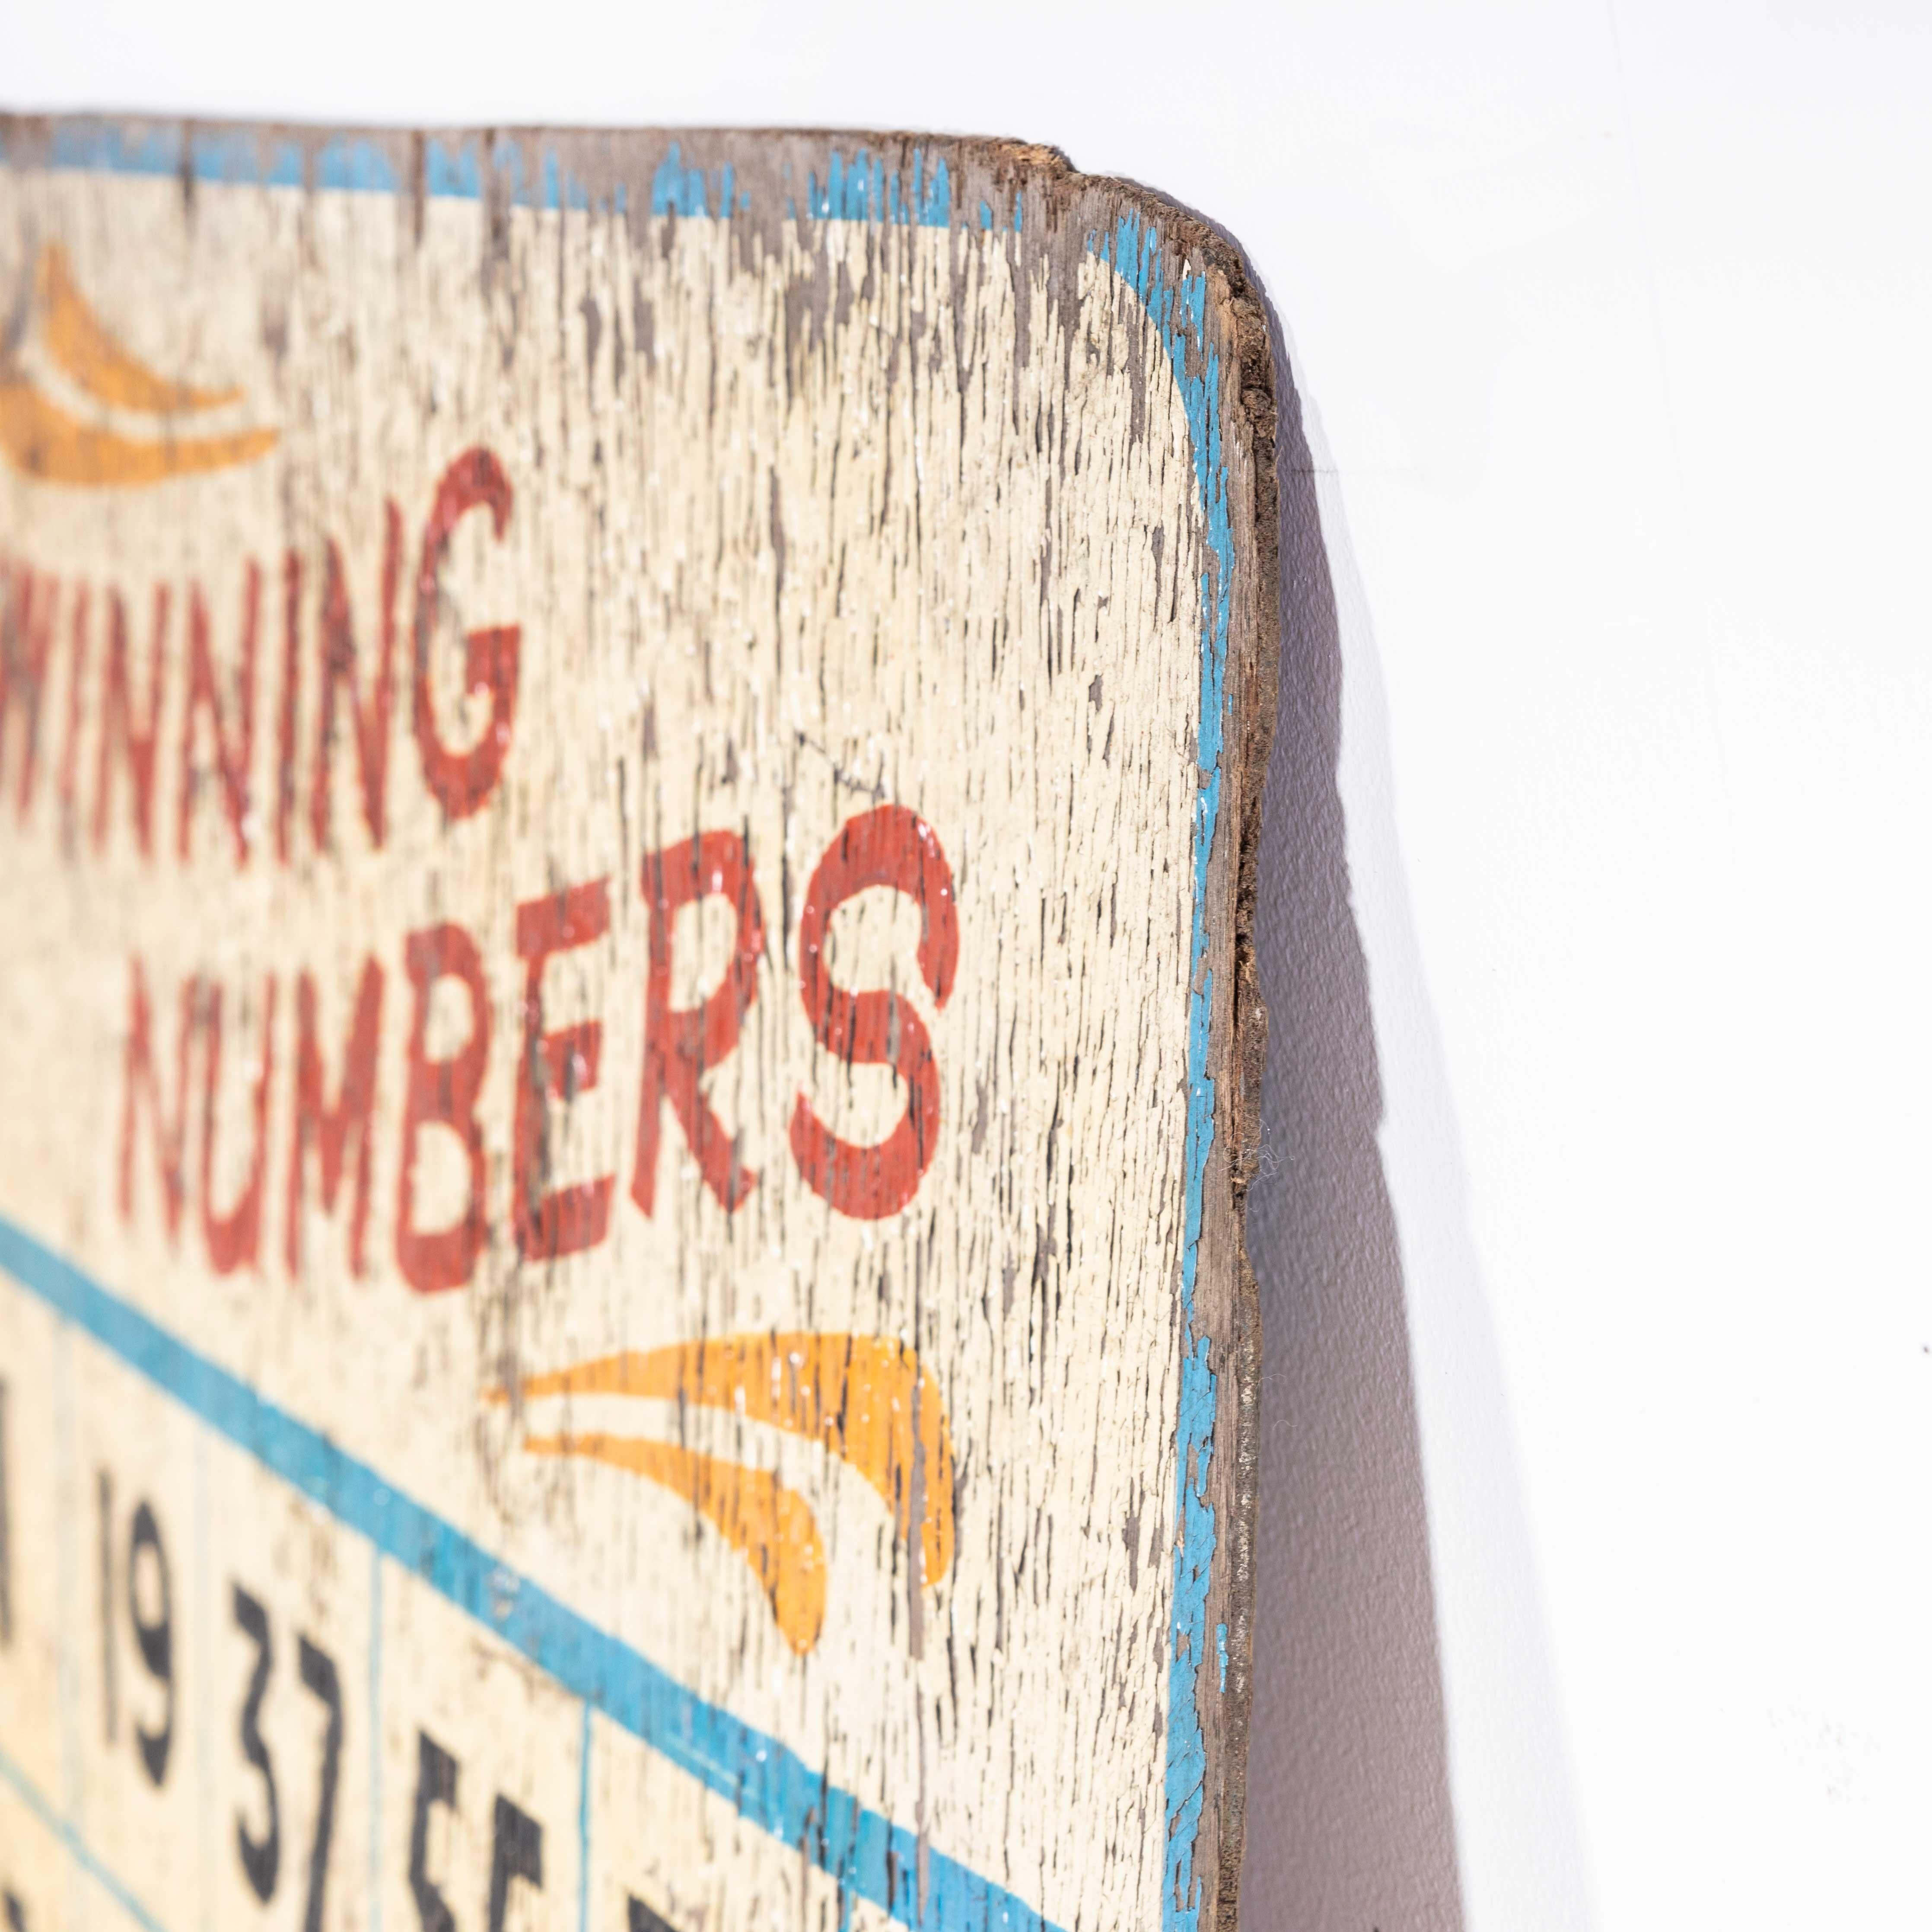 1950s Original Winning Numbers Large Fairground Sign
1950s Original Winning Numbers Large Fairground Sign. Lovely honest and original fairground sign mounted on wooden board and hand painted.

WORKSHOP REPORT
Our workshop team inspect every